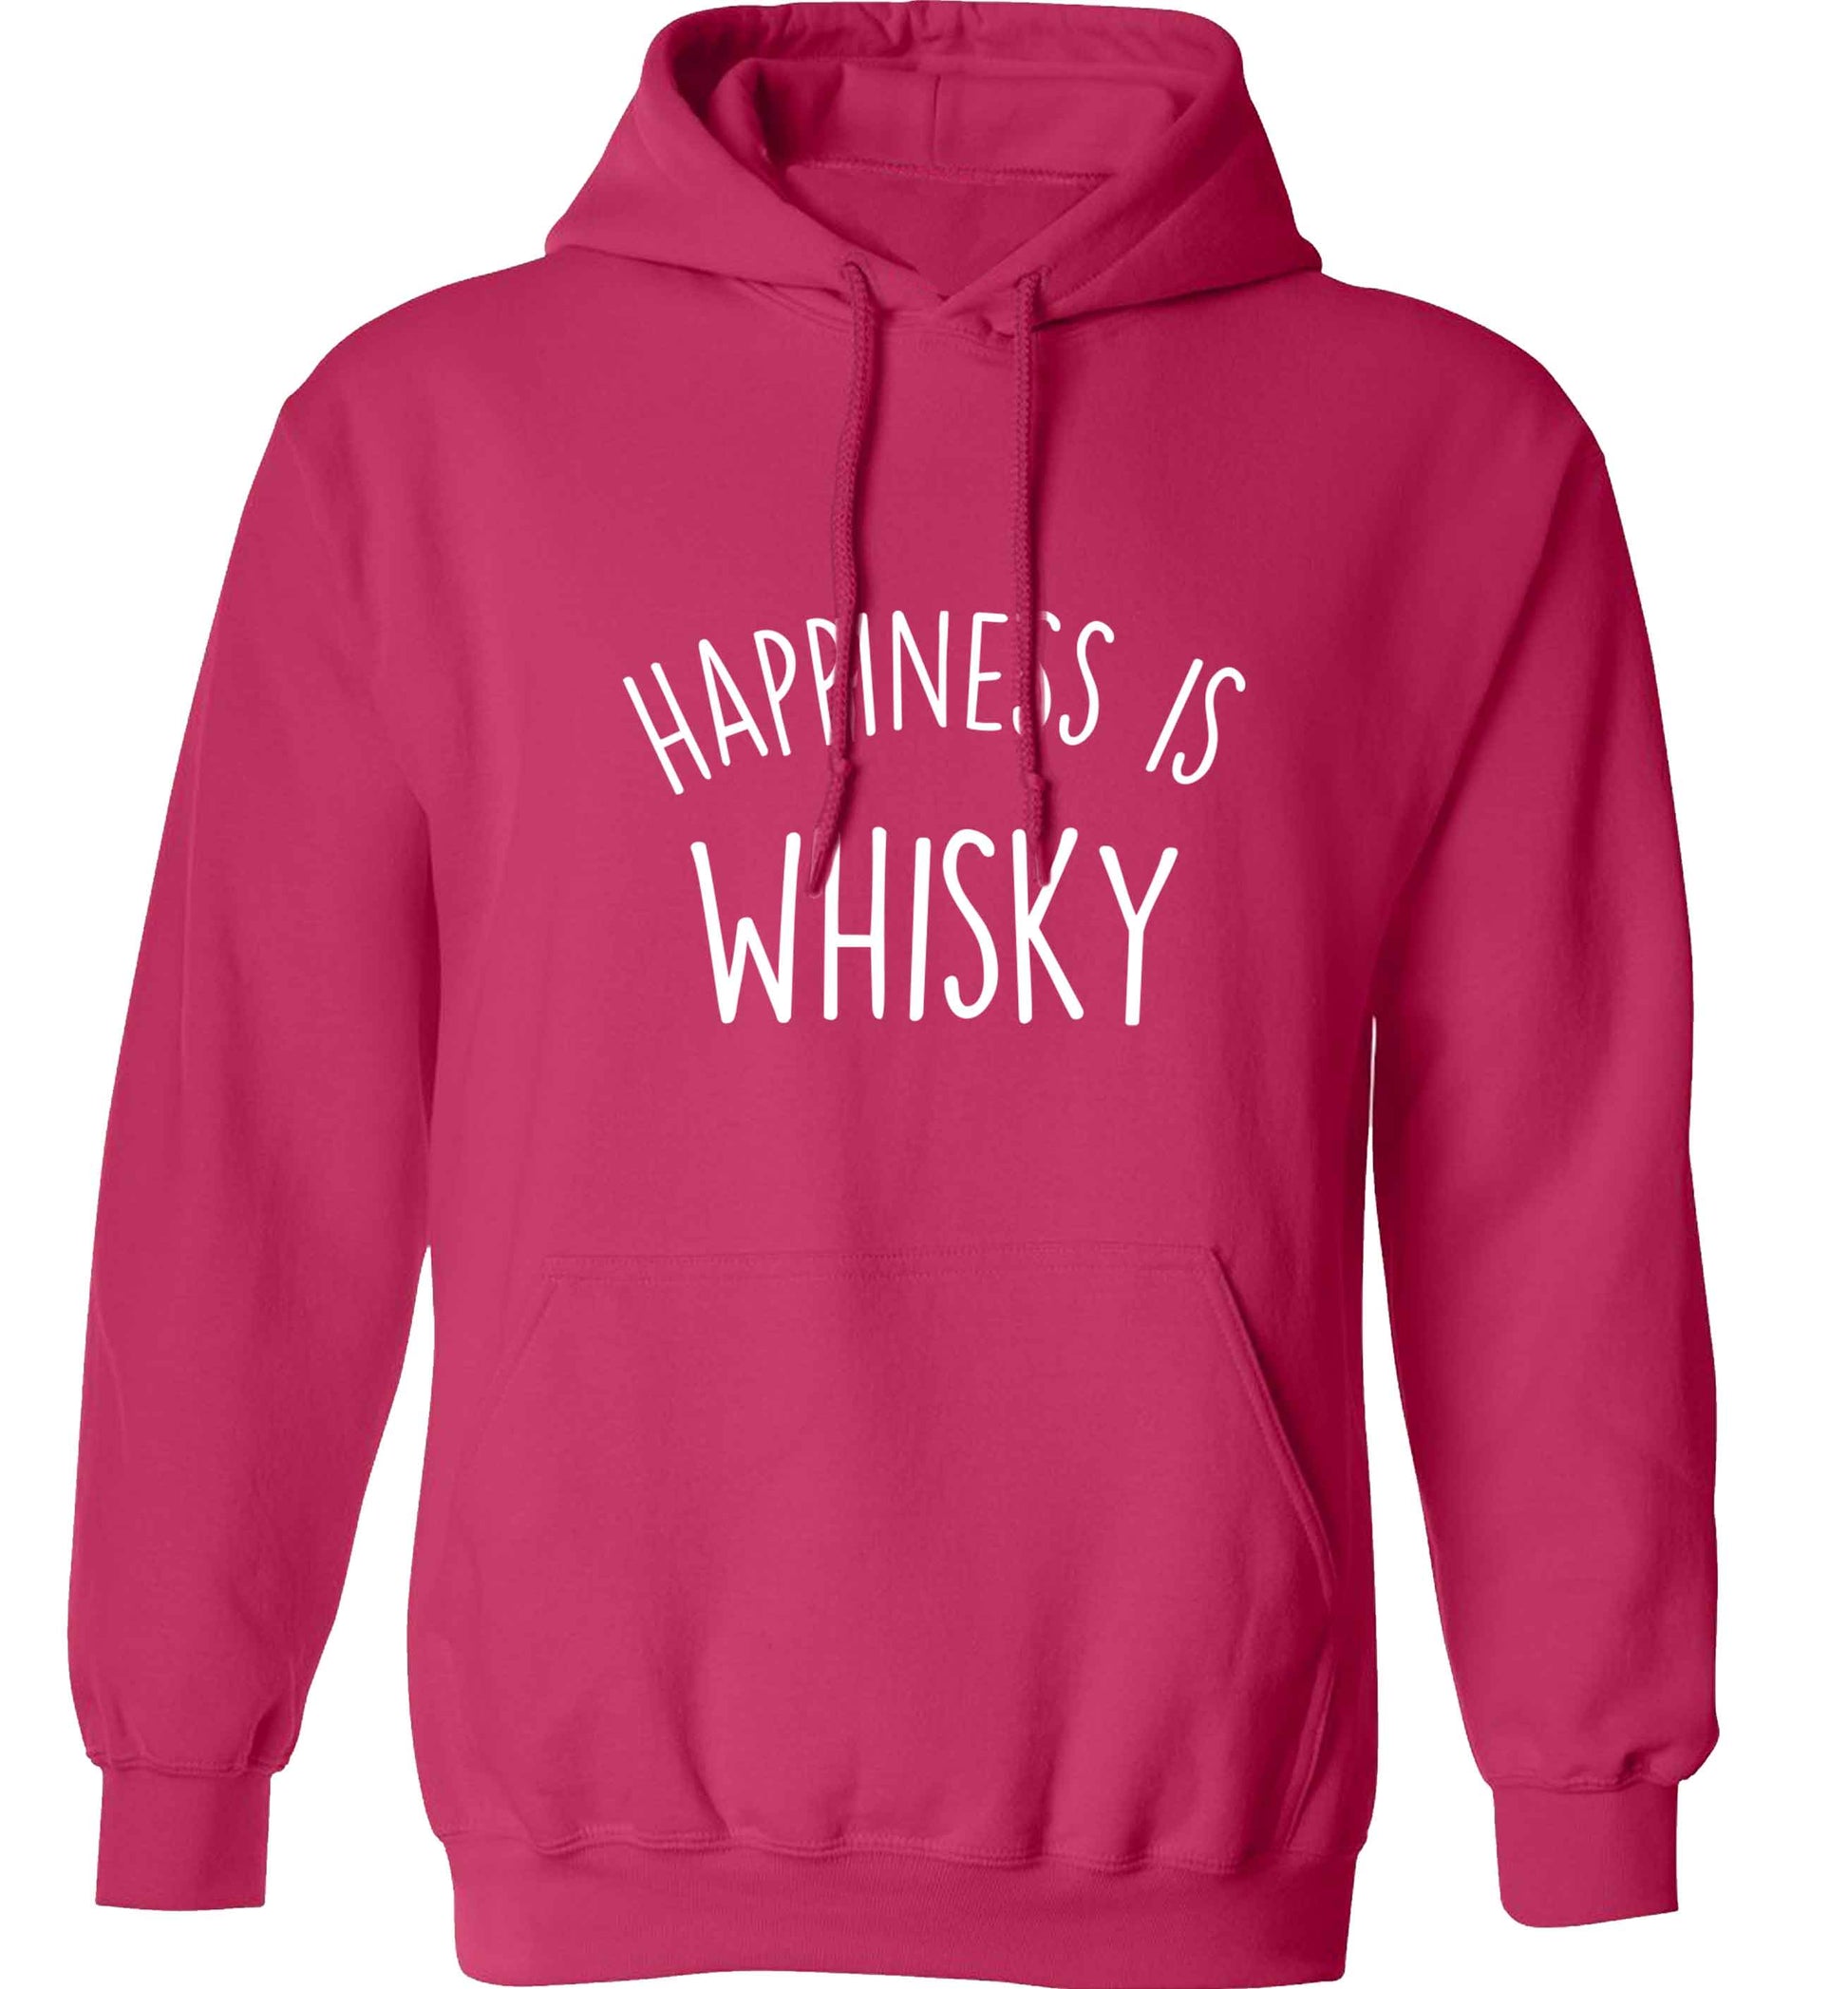 Happiness is whisky adults unisex pink hoodie 2XL